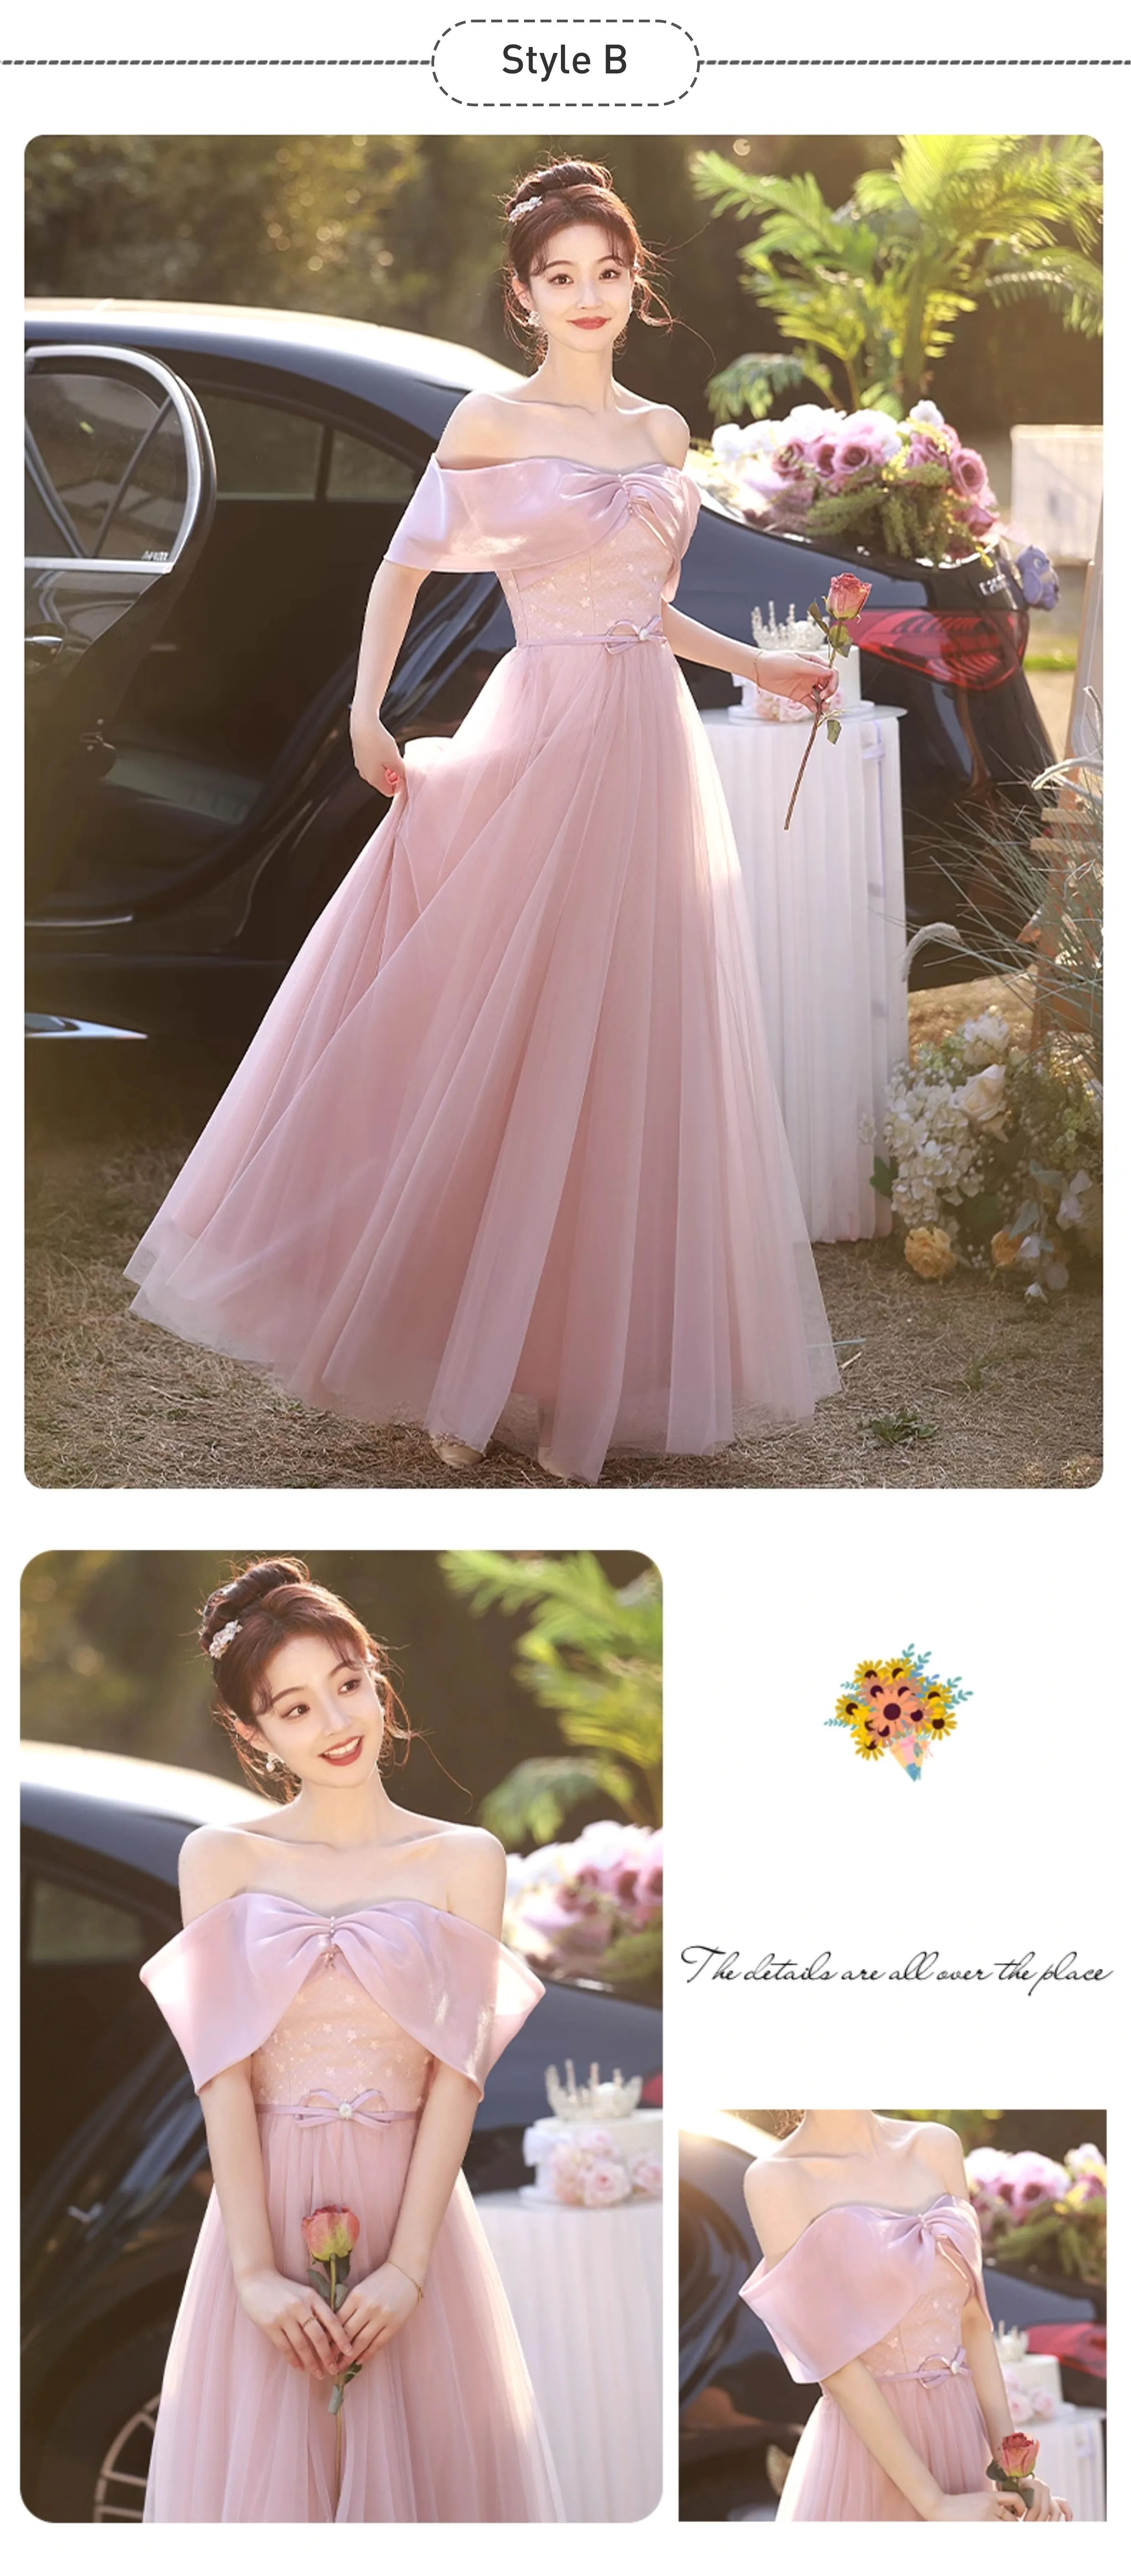 Sweet-Off-the-Shoulder-Pink-Birthday-Party-Bridesmaid-Dress-Evening-Gown20